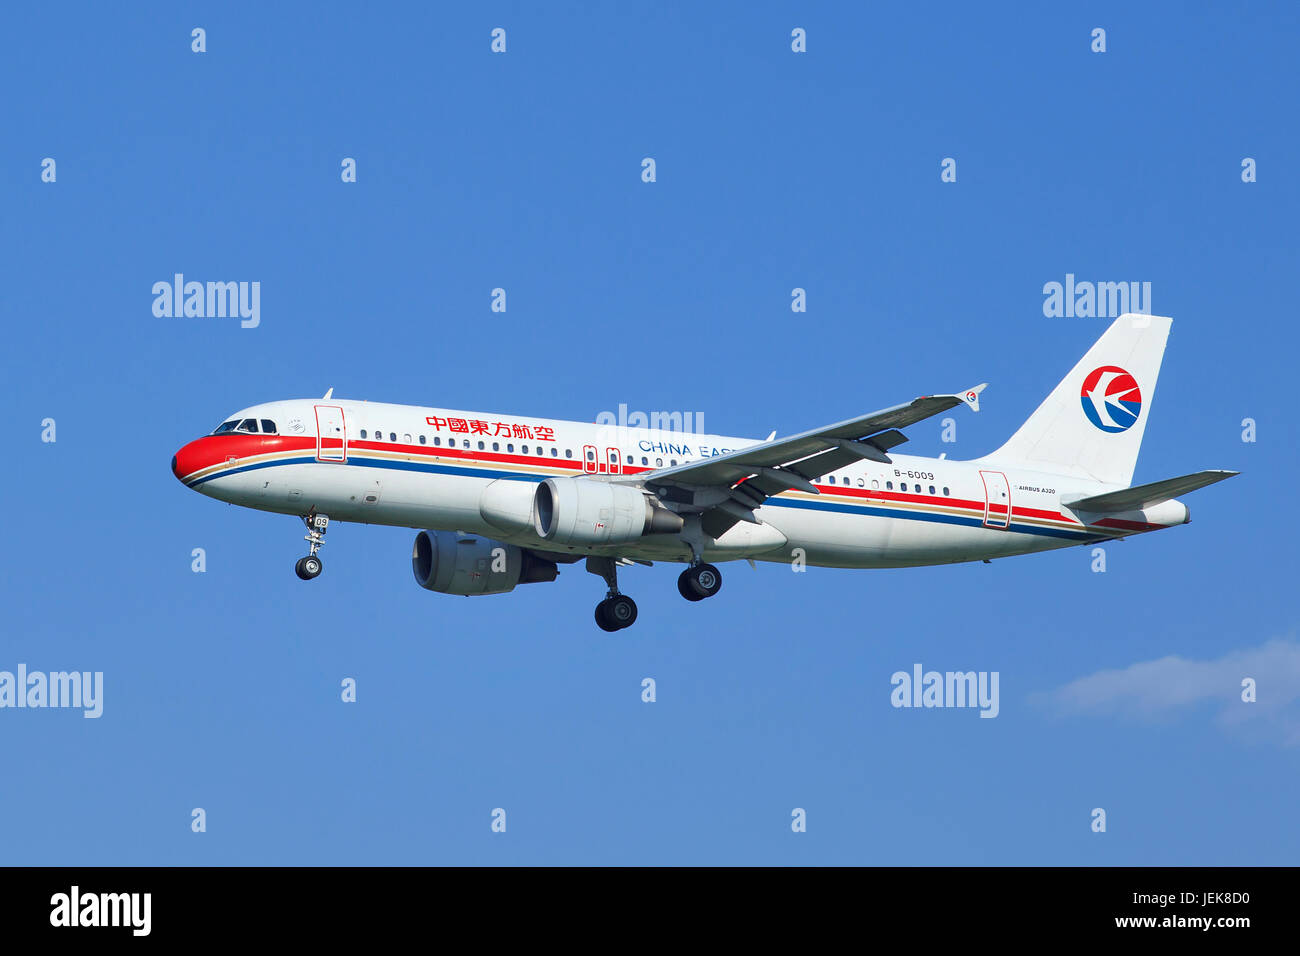 BEIJING-JULY 5. China Eastern Airbus 320-214, B-6009. Airbus A320 family consists of short- to medium-range, narrow-body, commercial jet airliners. Stock Photo